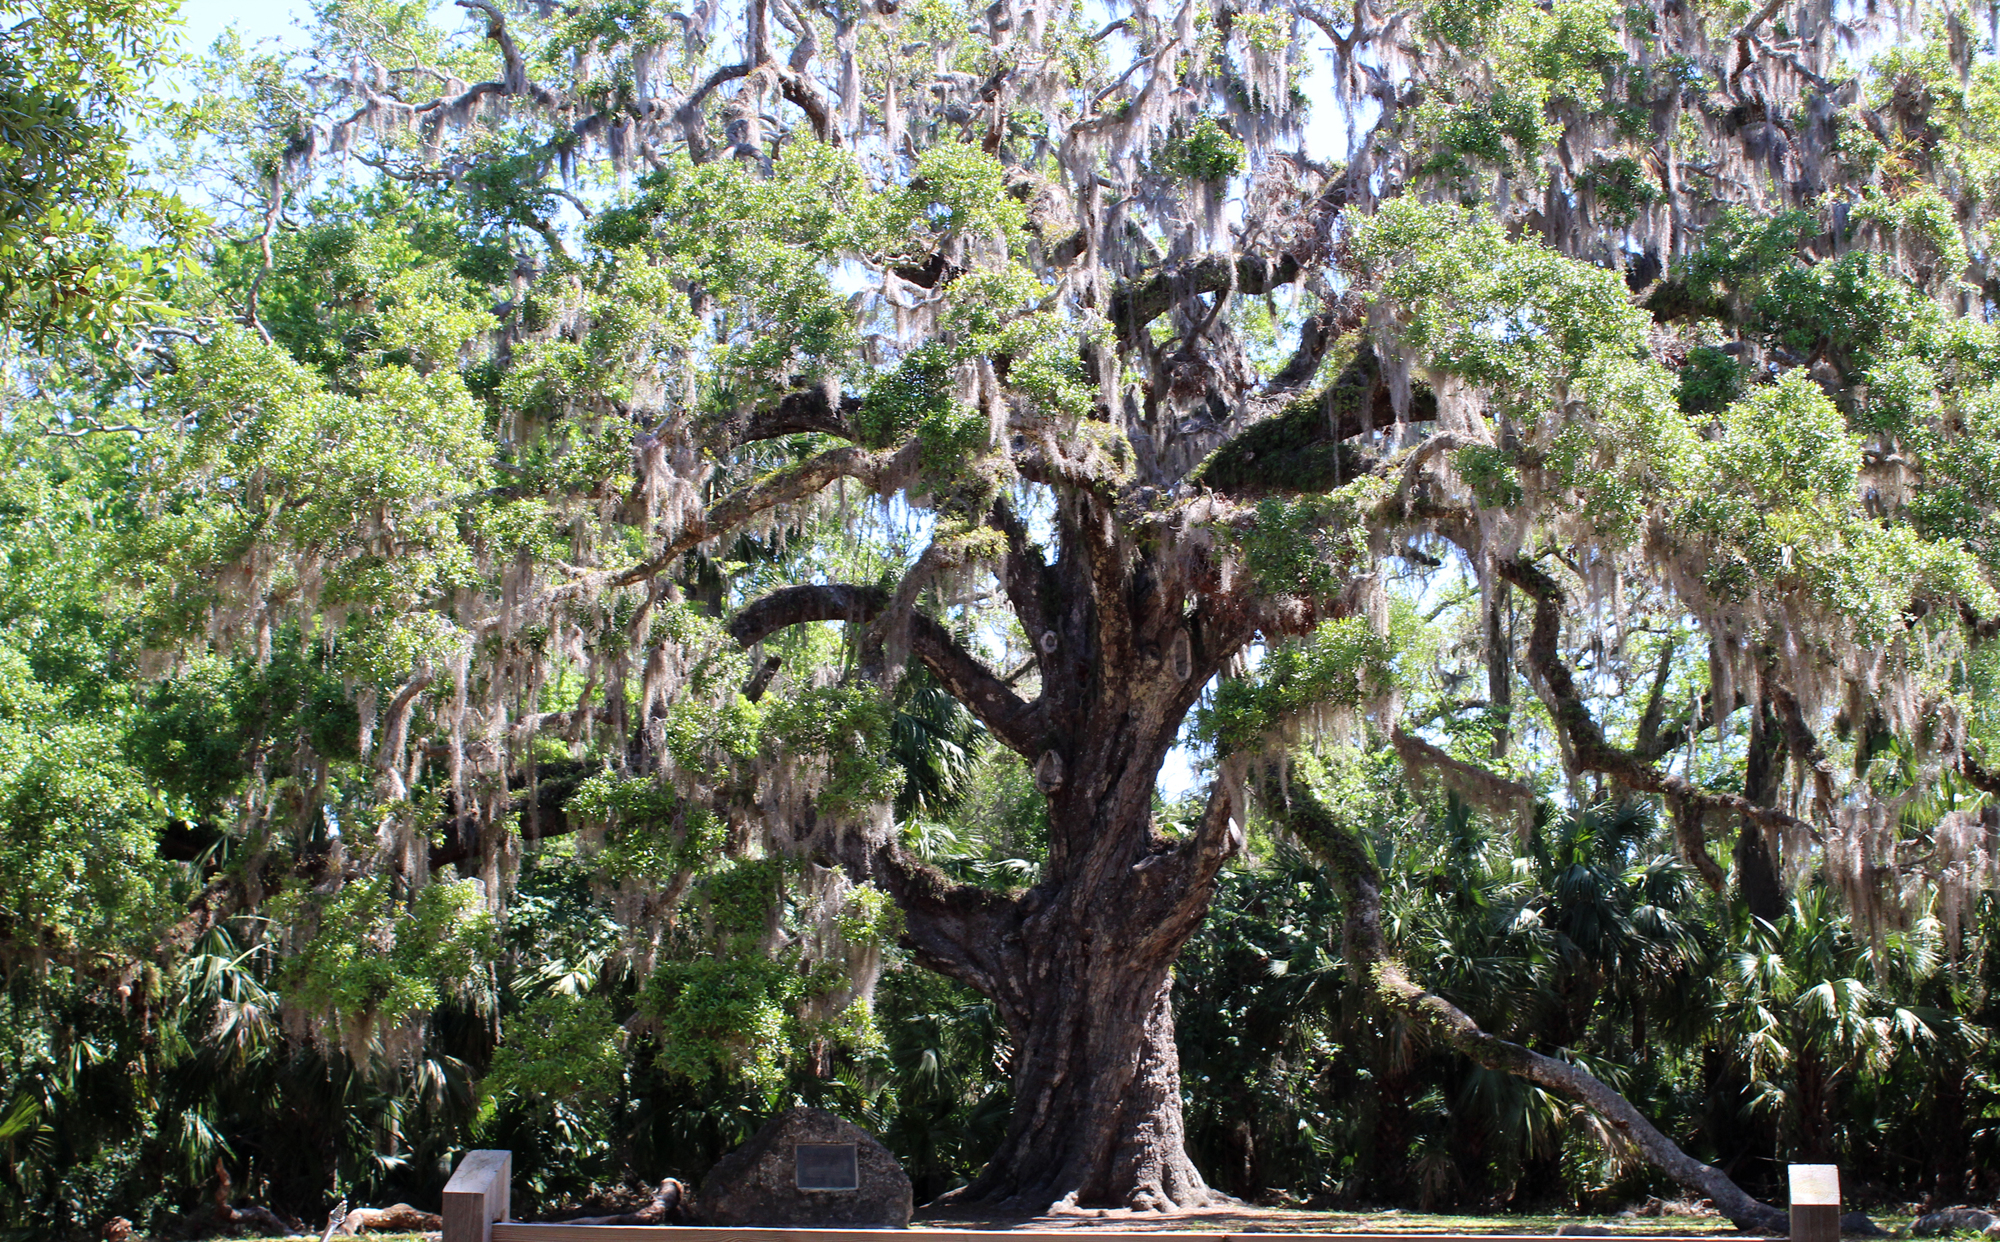 The Fairchild Oak drapped in Spanish Moss. Photo by Jacque Estes